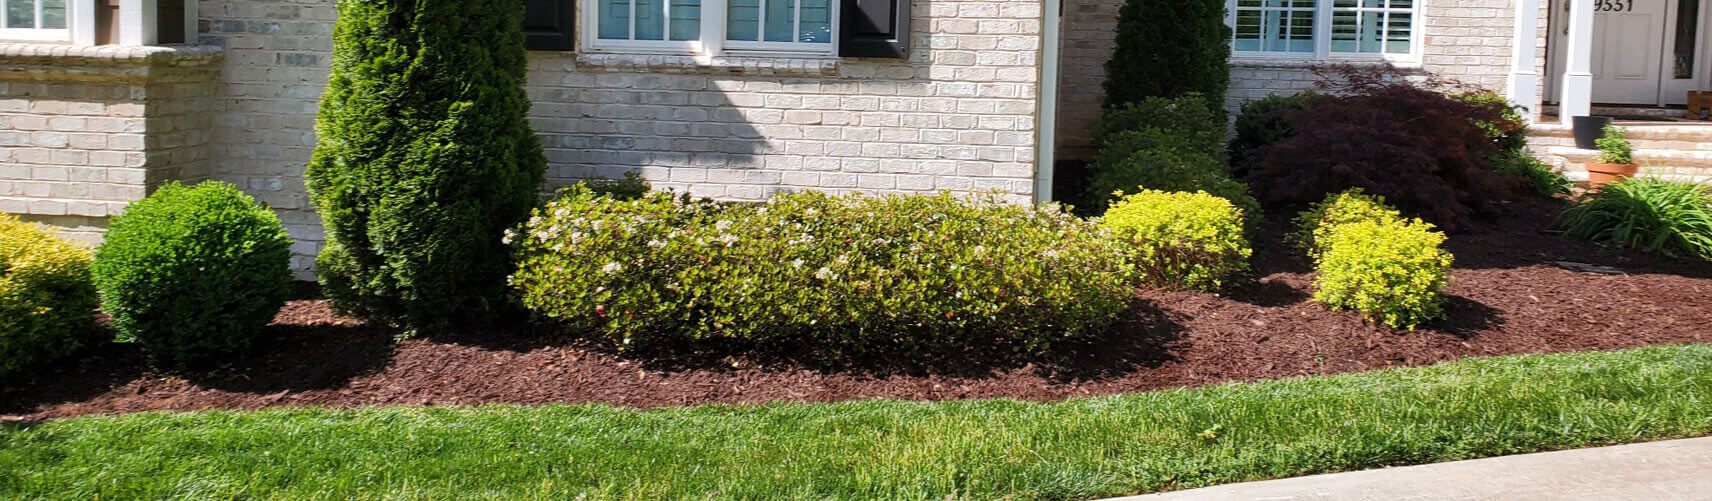 Kernersville Landscaping Company, Lawn Care Services and Tree Trimming Services